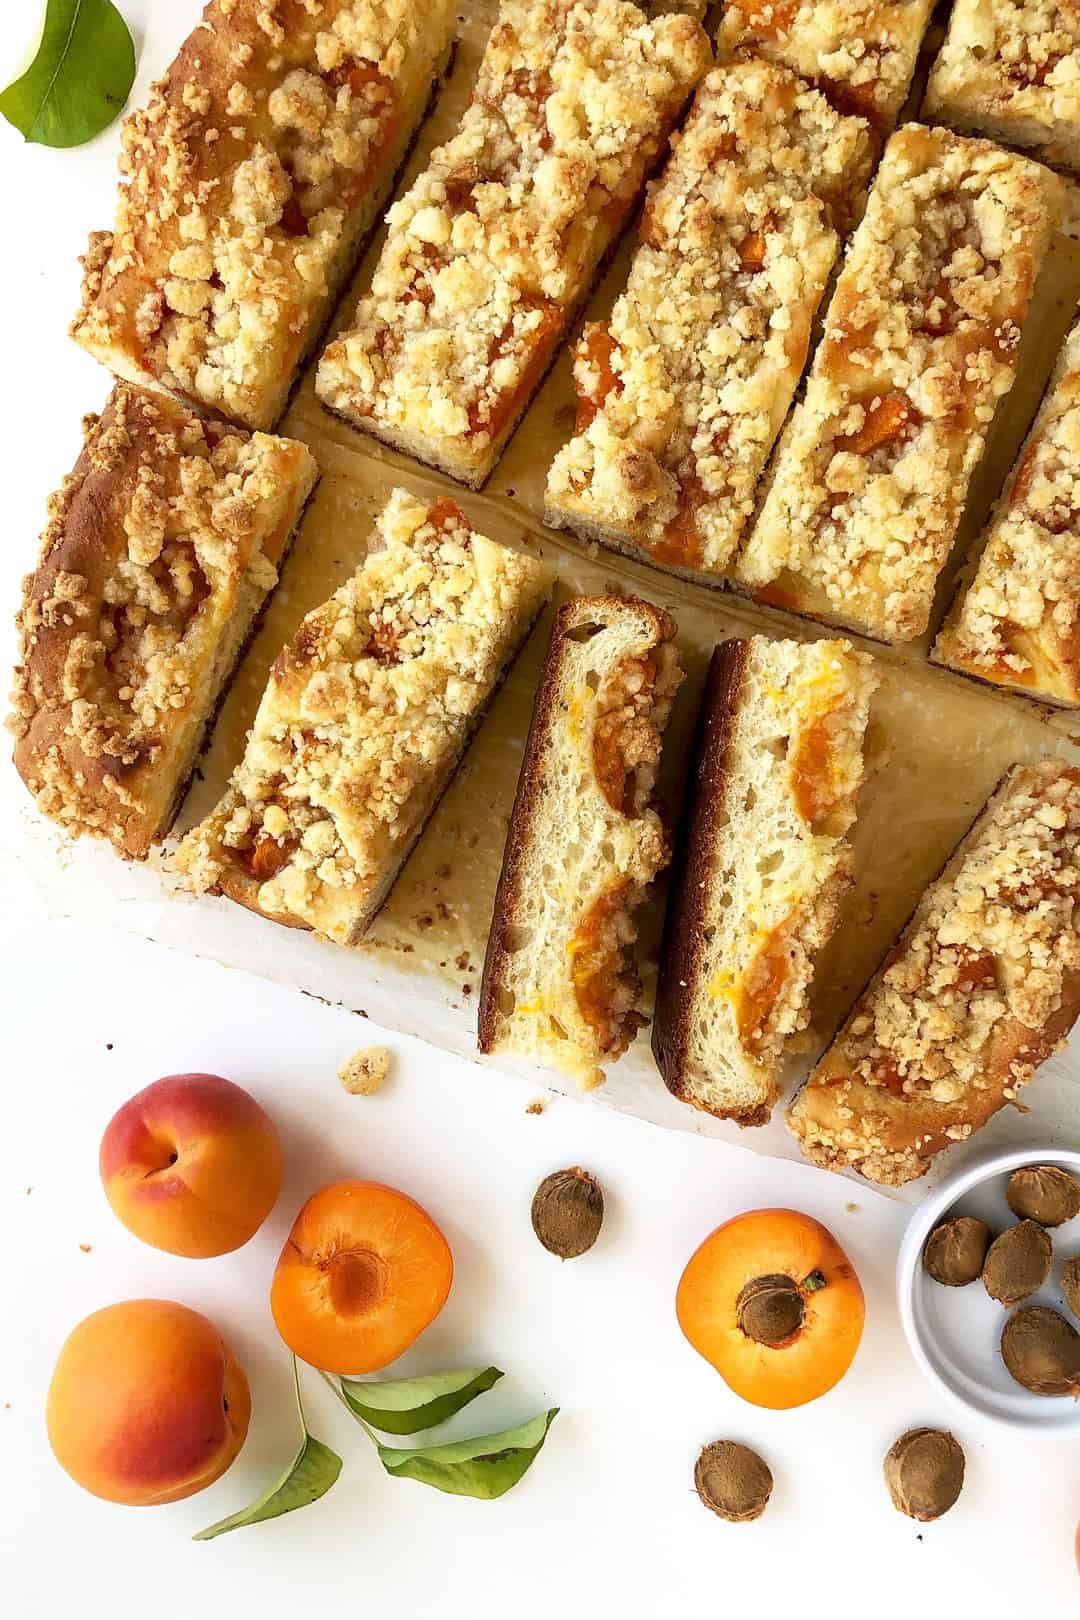 Yeast fruit cake with apricots